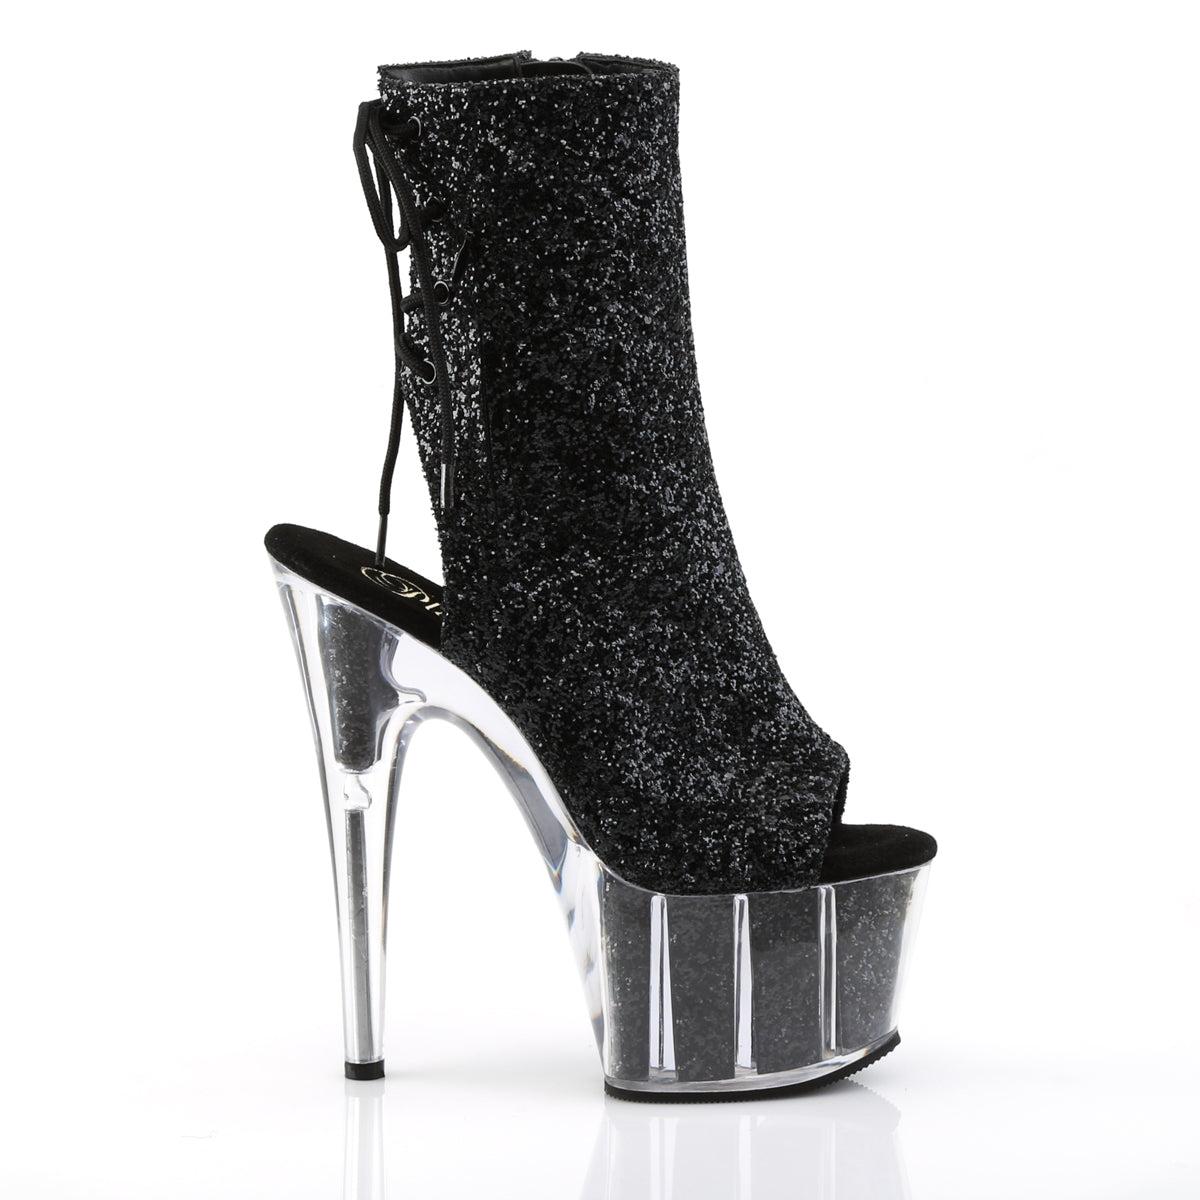 ADORE-1018G 7 Inch Heel Black Glitter Strippers Ankle Boots-Pleaser- Sexy Shoes Fetish Heels